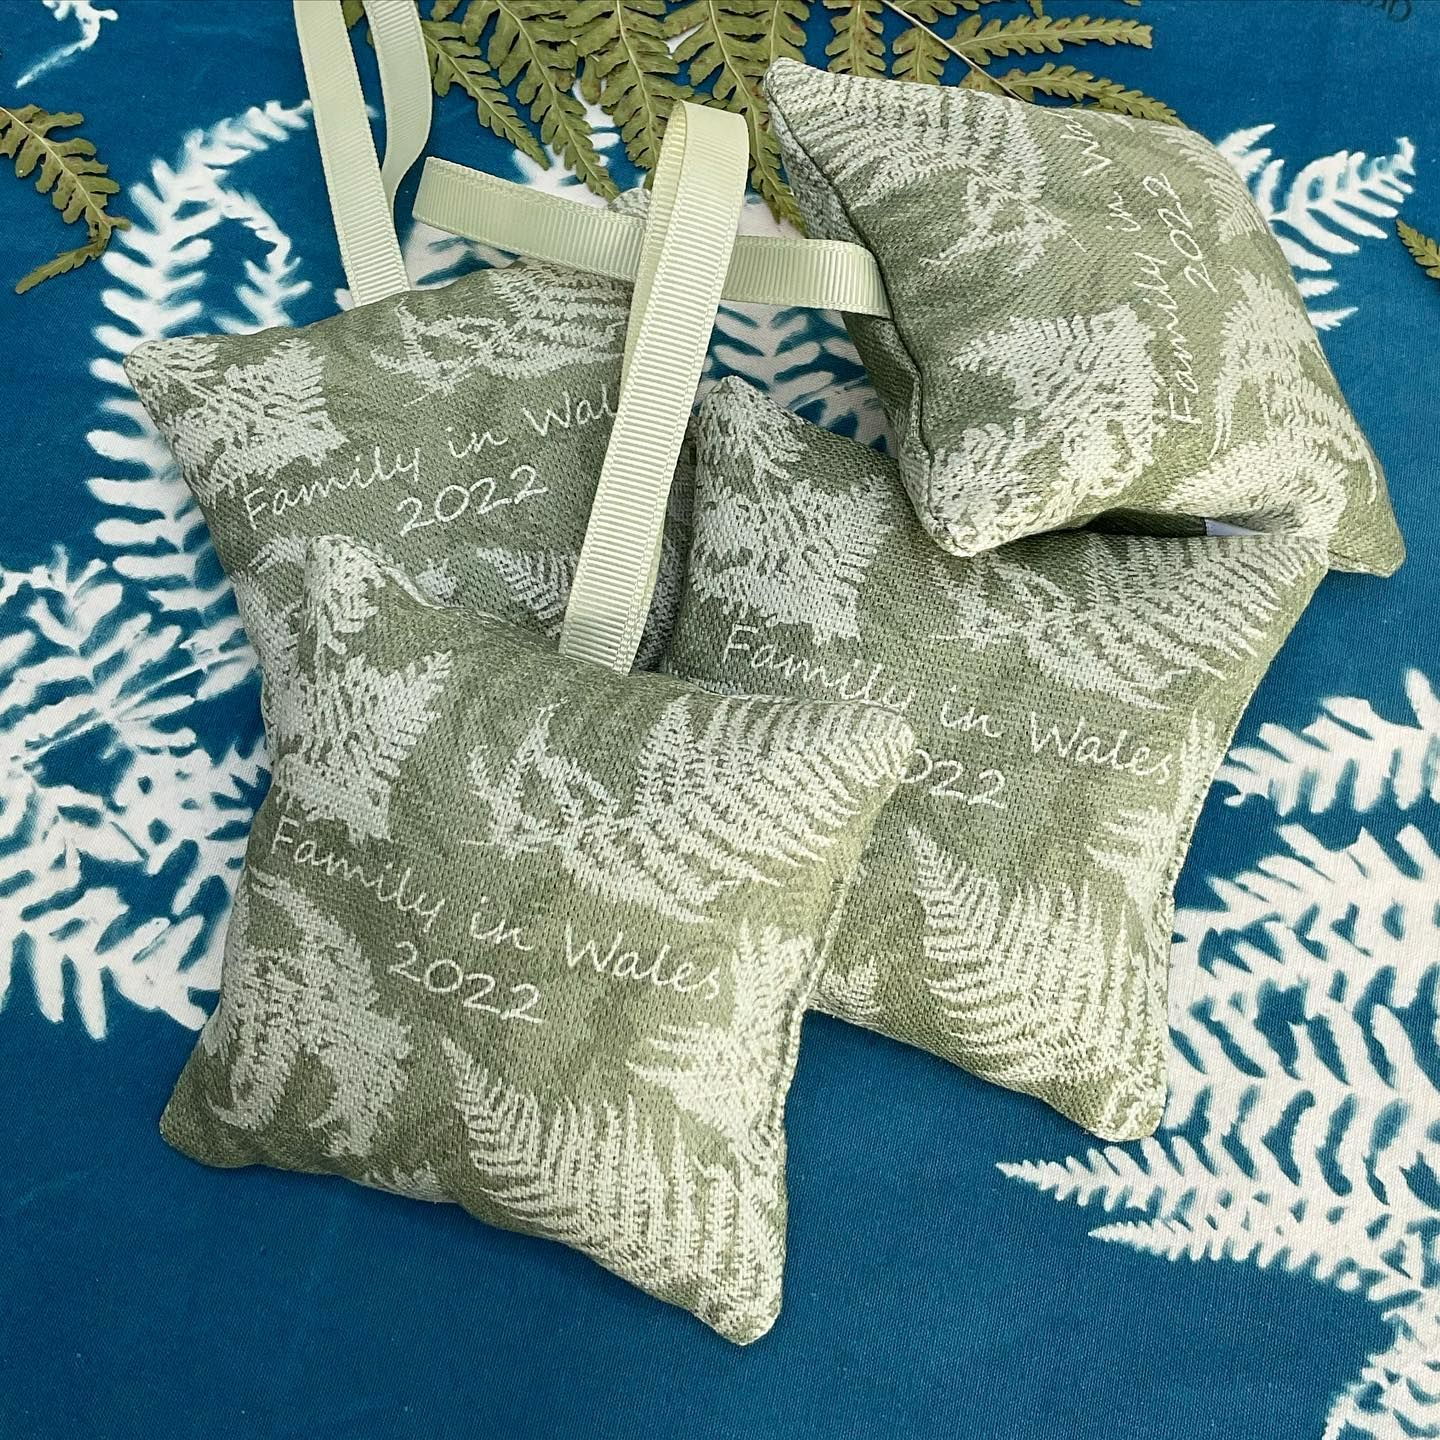 4 lavender bags made from green fabric with a fern print. The bag has 'Family in Wales 2022' printed on it.